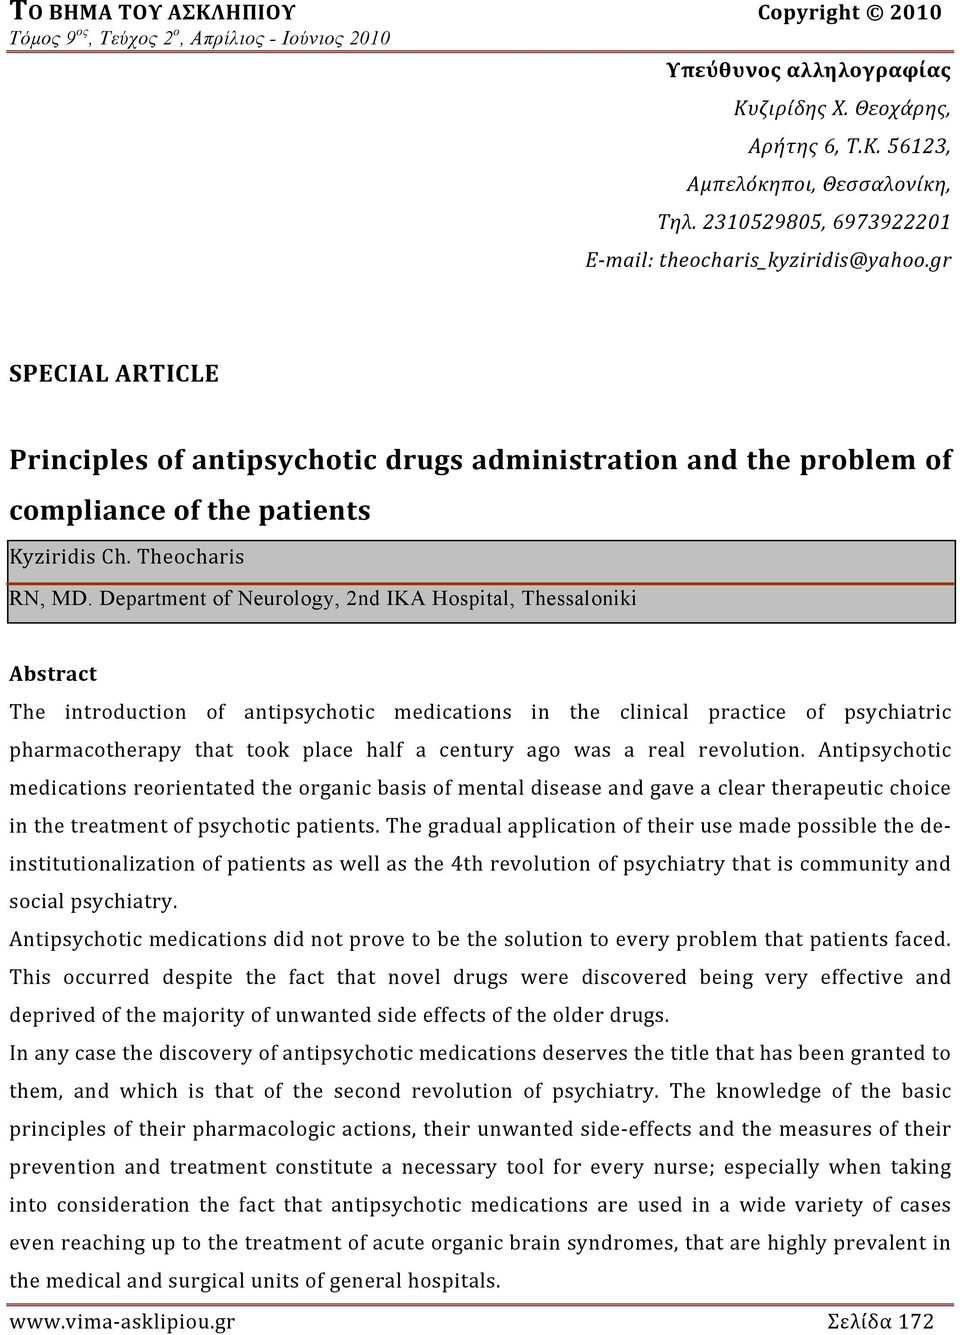 Department of Neurology, 2nd IKA Hospital, Thessaloniki Abstract The introduction of antipsychotic medications in the clinical practice of psychiatric pharmacotherapy that took place half a century